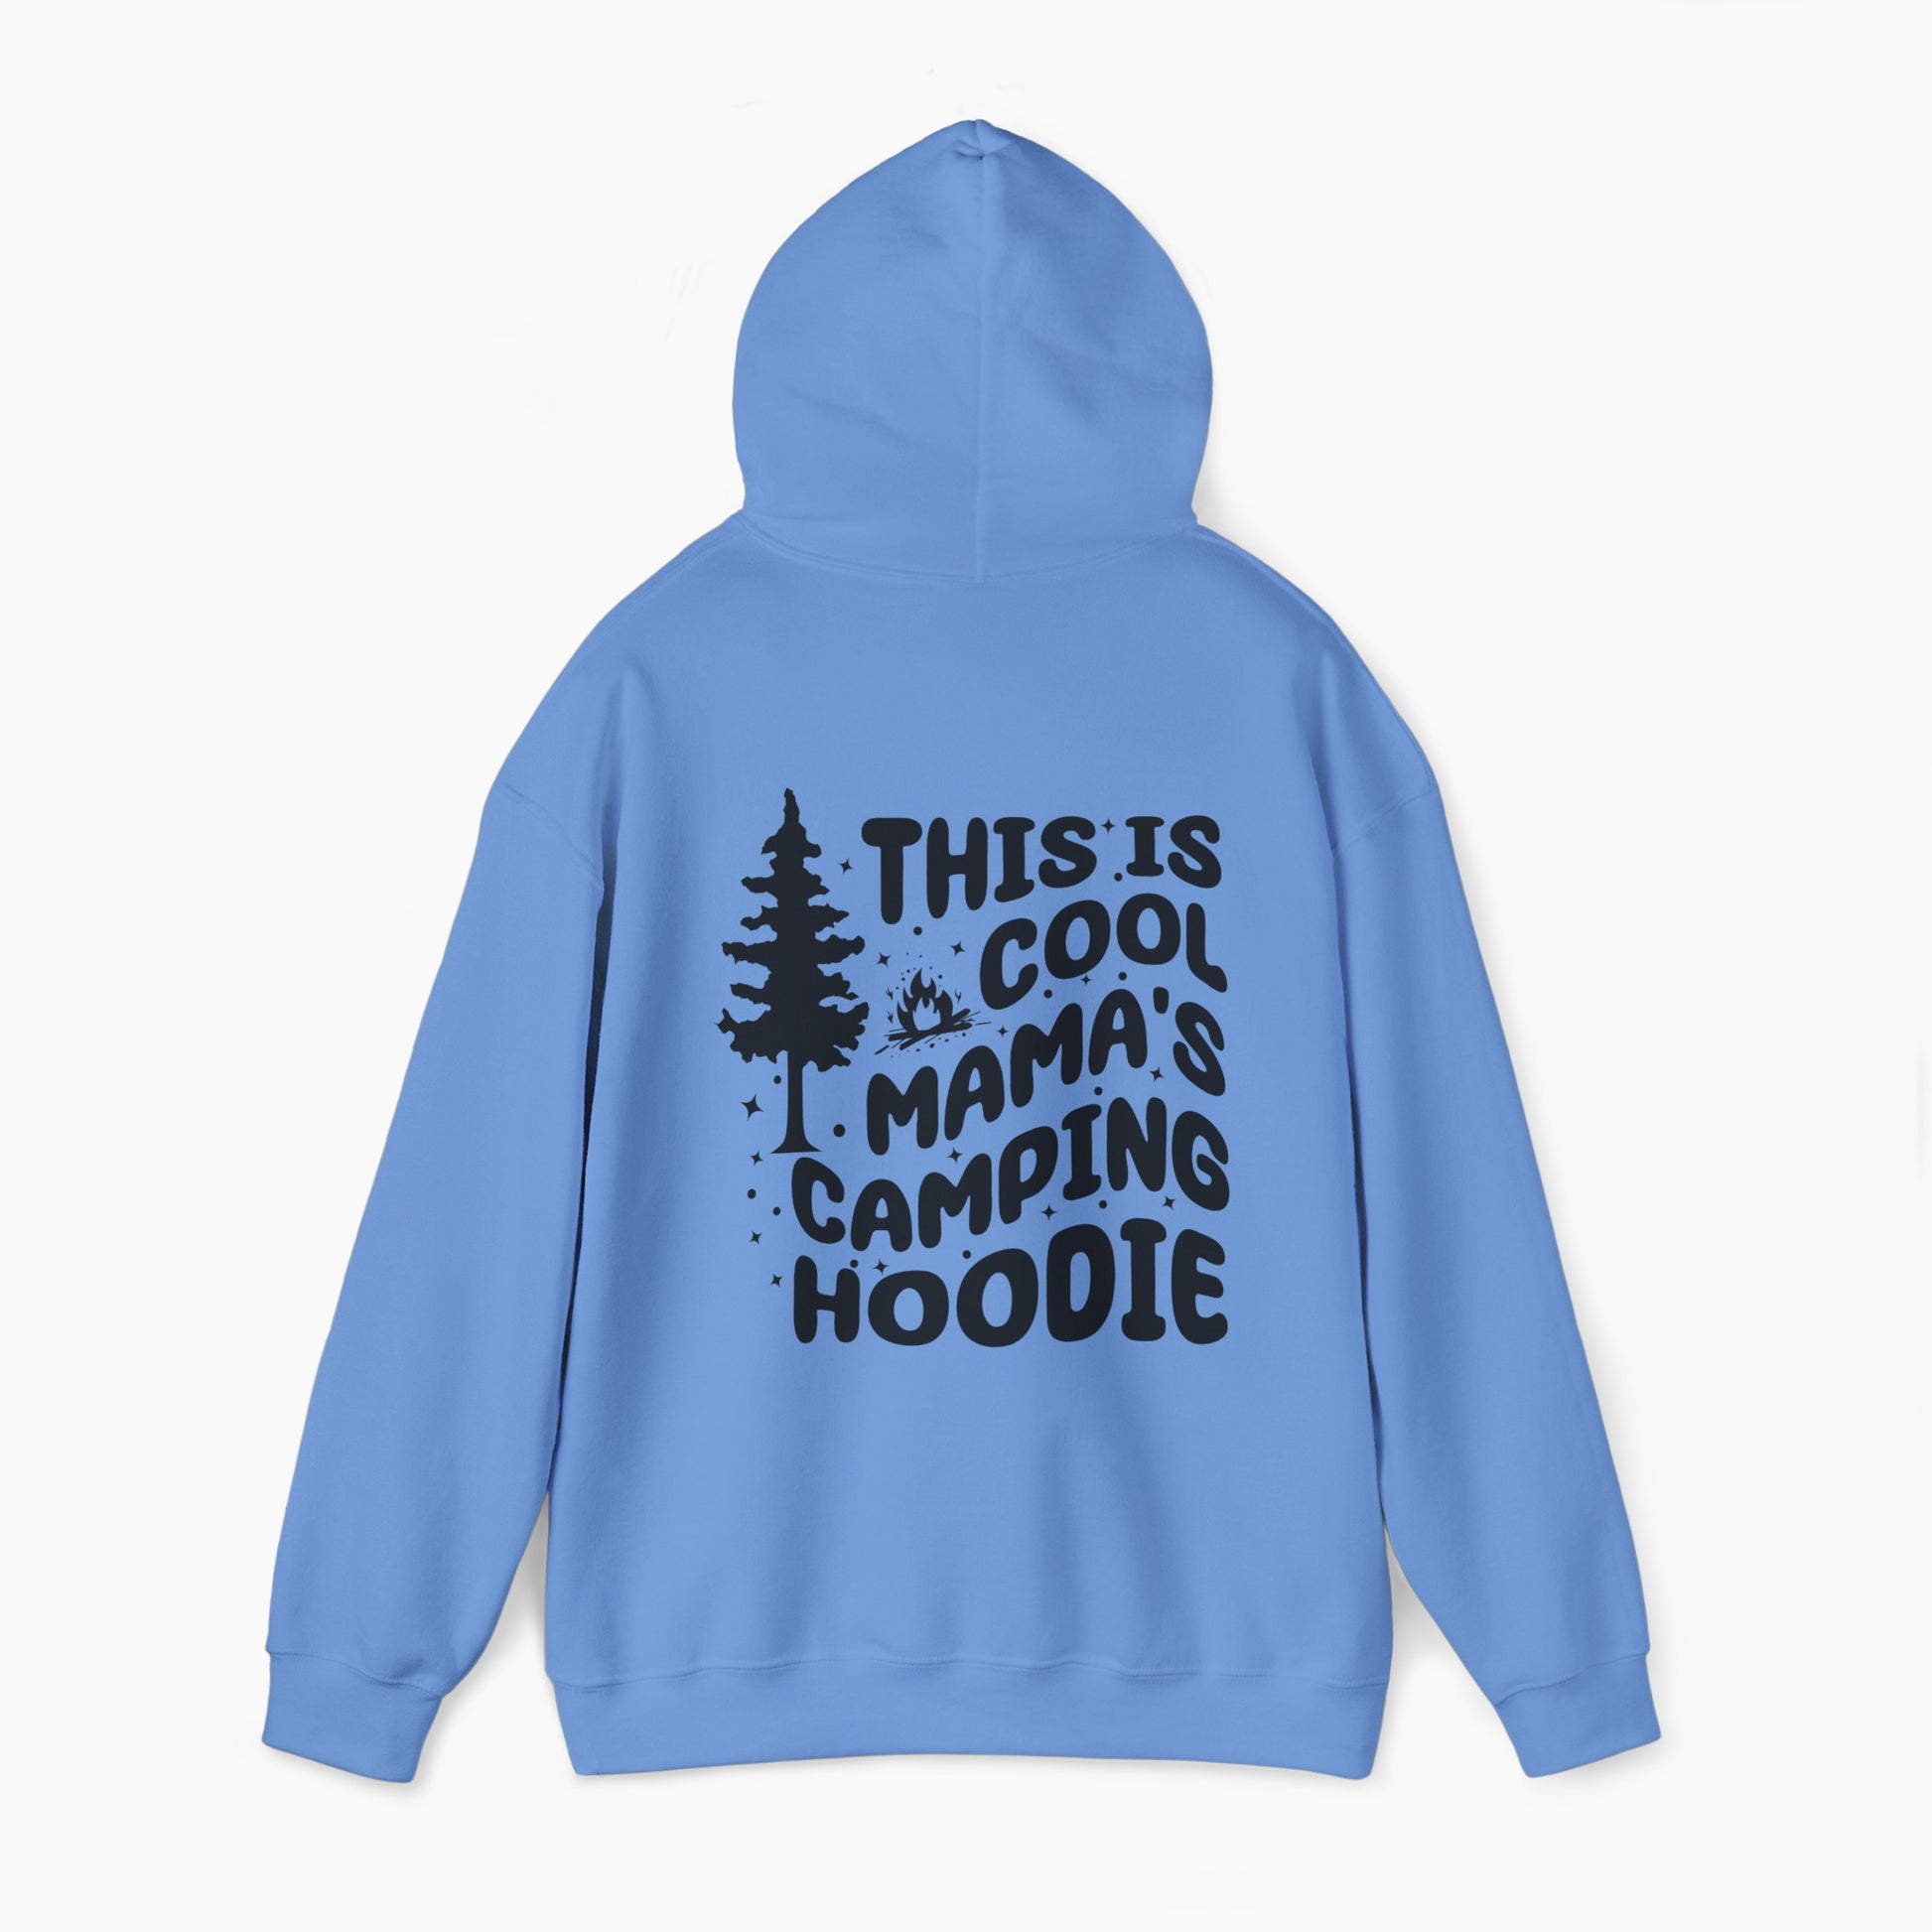 Blue hoodie with the text 'This is cool mama's camping hoodie' on the back, featuring a tree and stars design on a plain background.